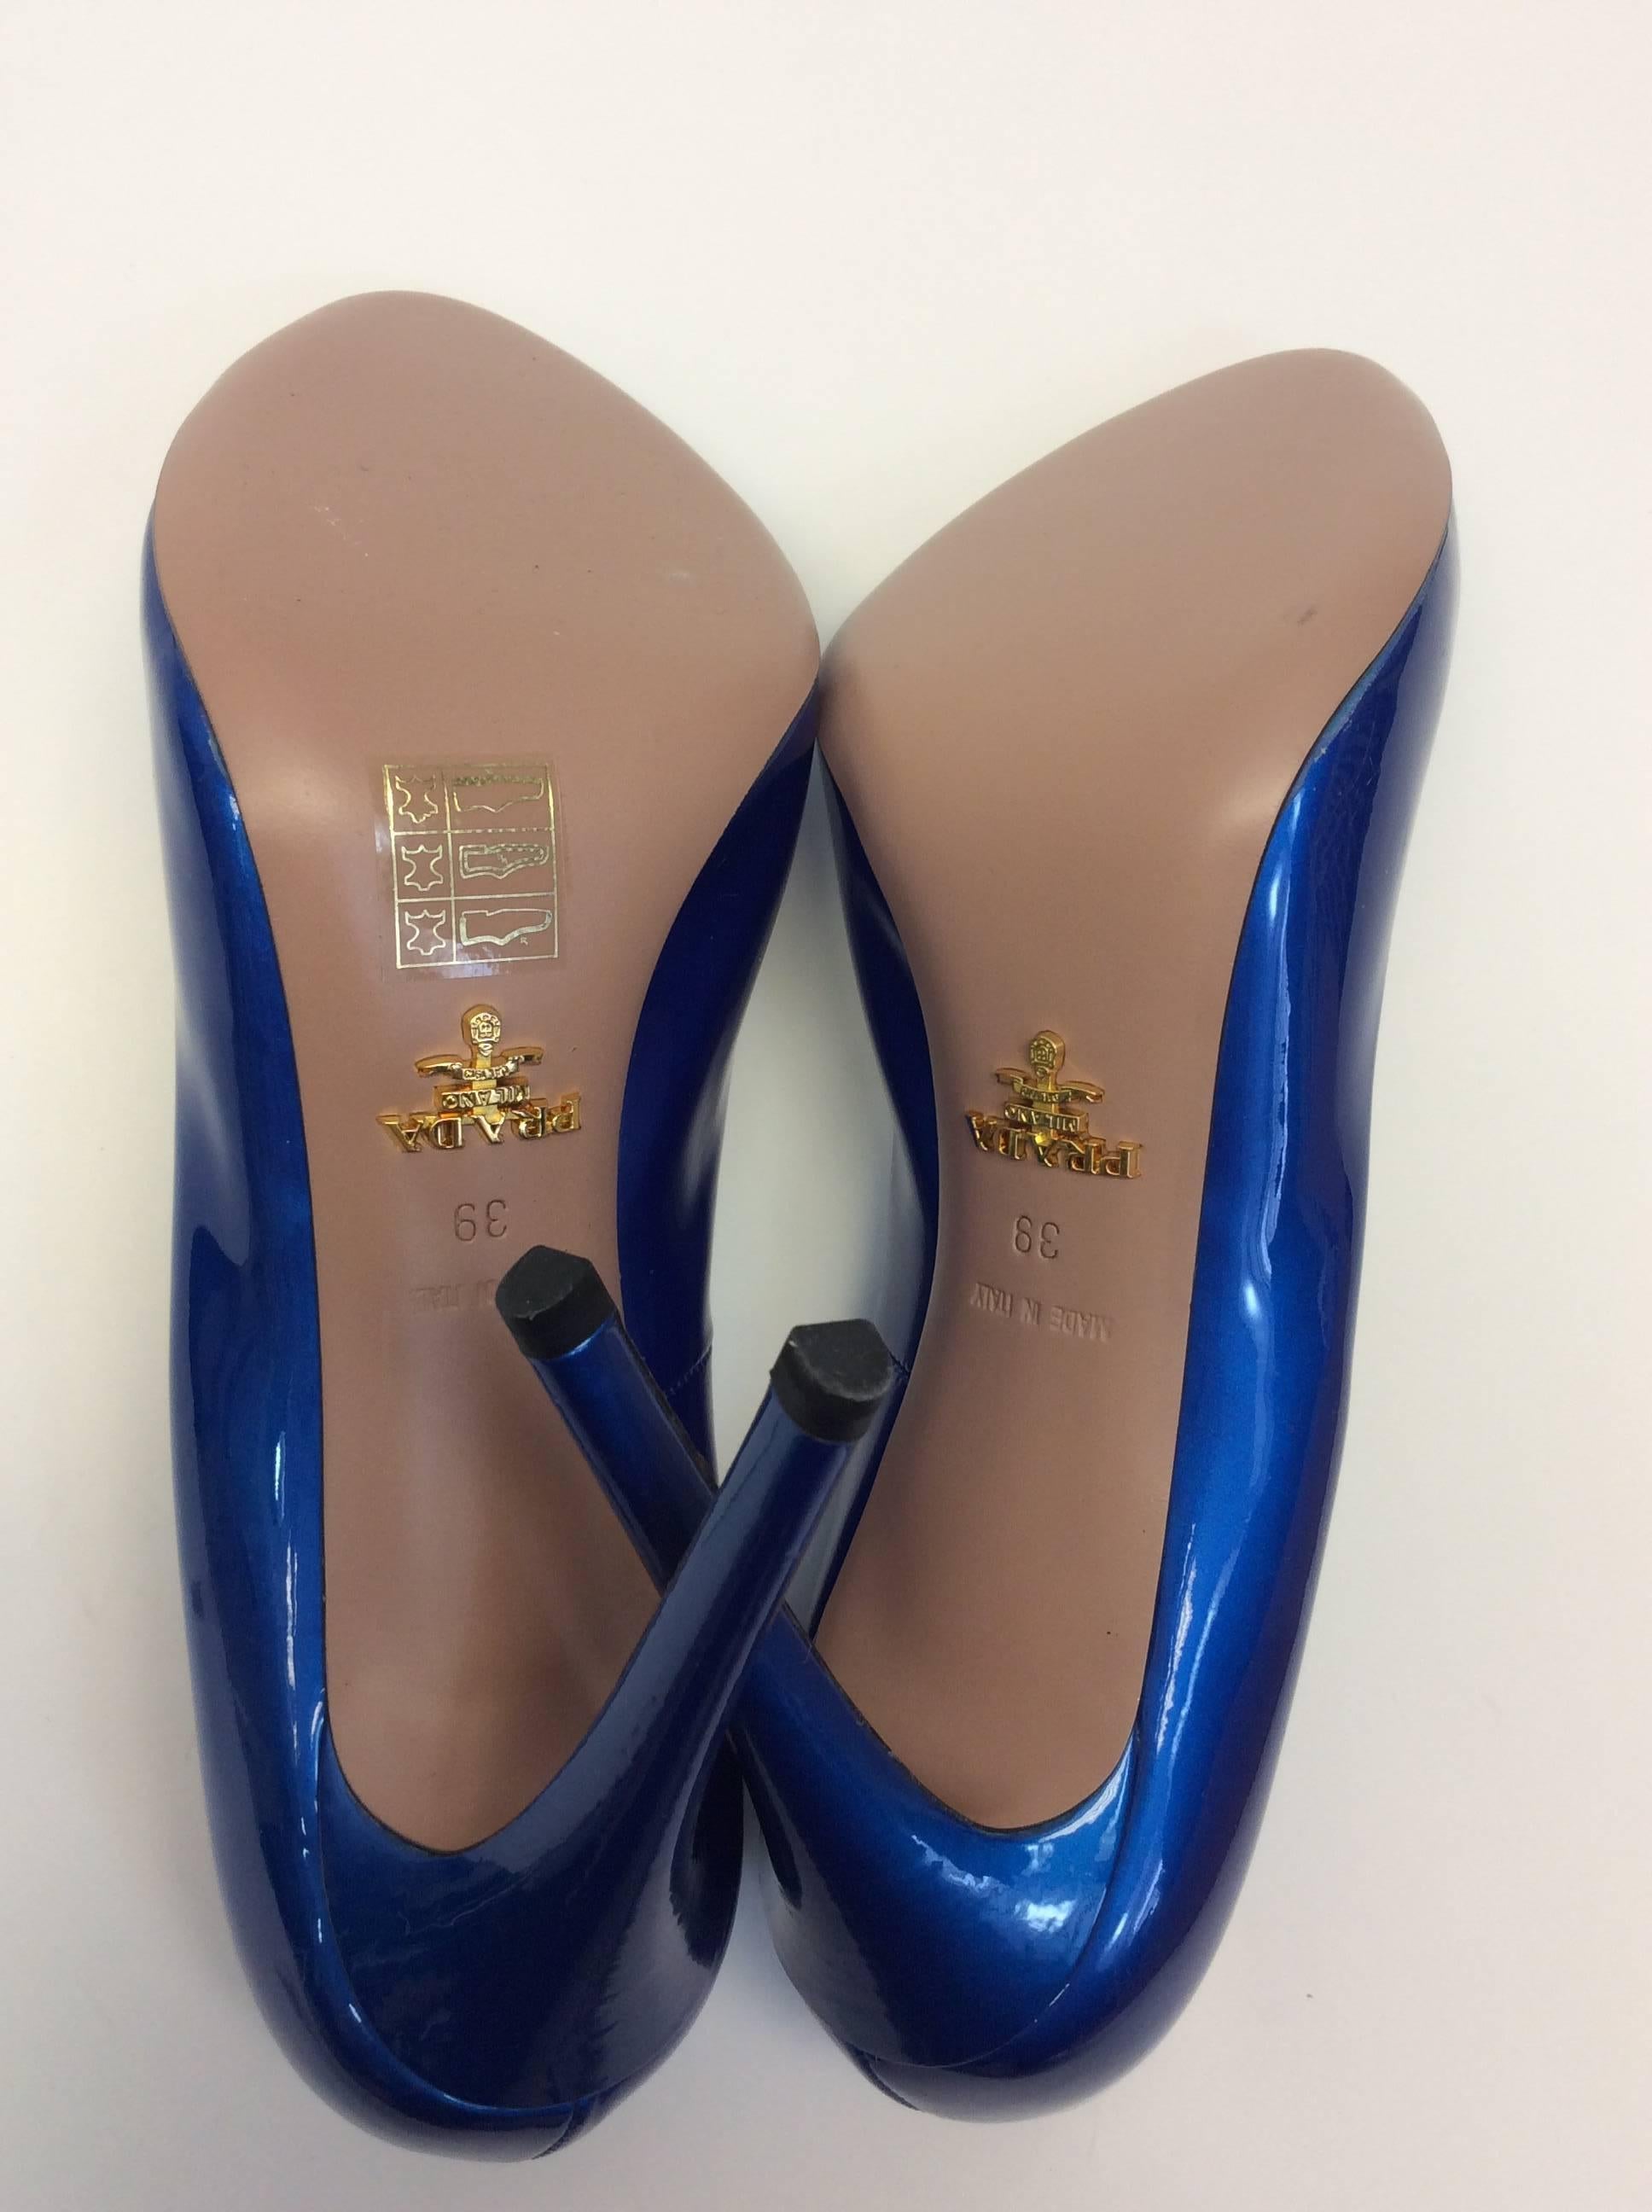 Prada Royal Blue Patent Leather Pump In New Condition For Sale In Narberth, PA